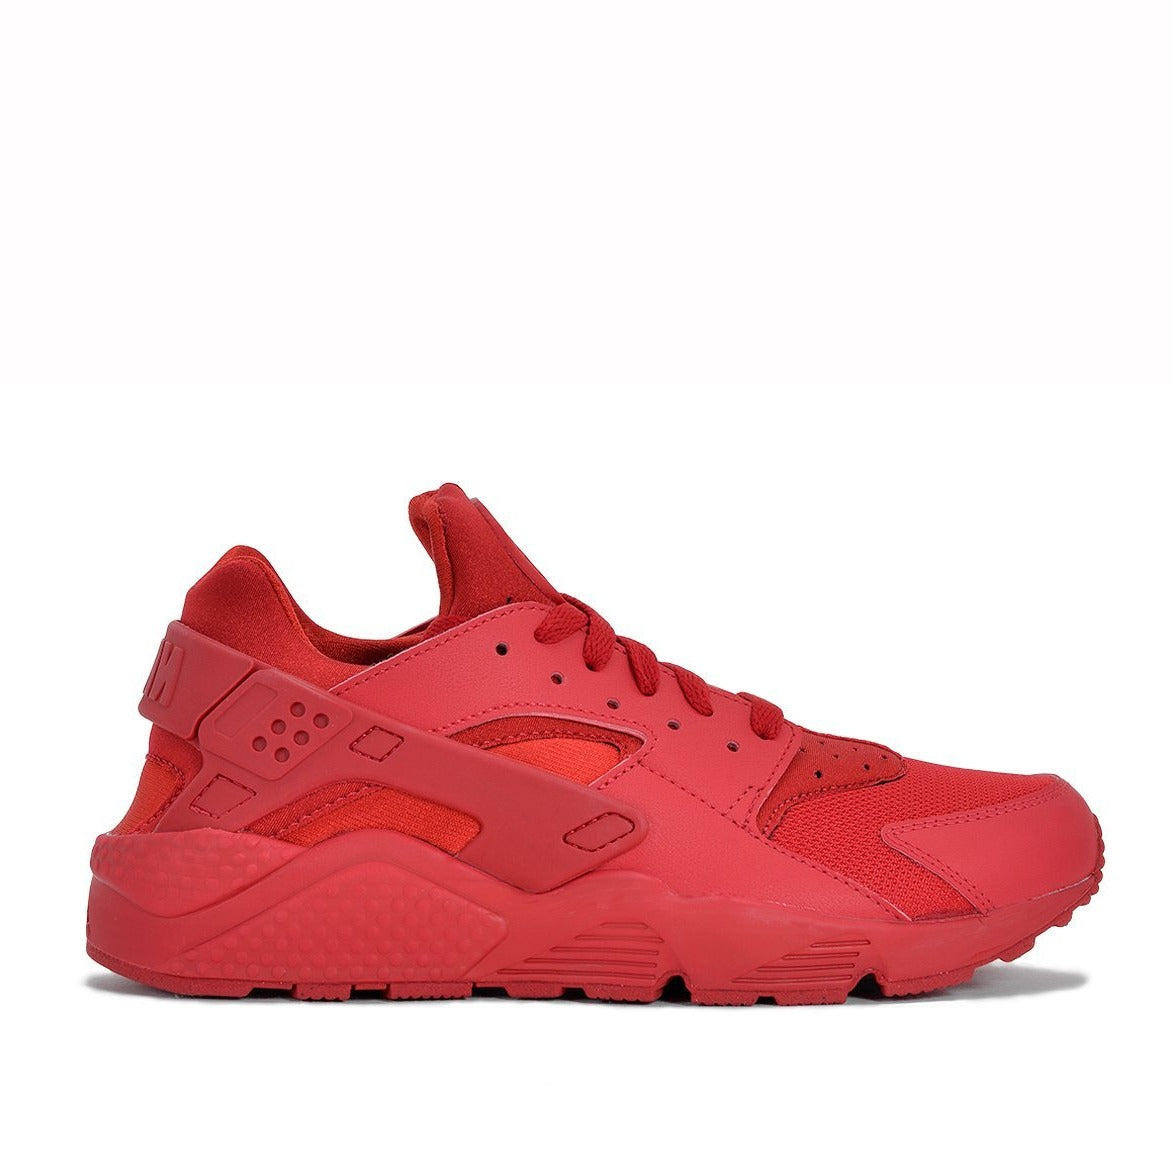 air huarache varsity red release date